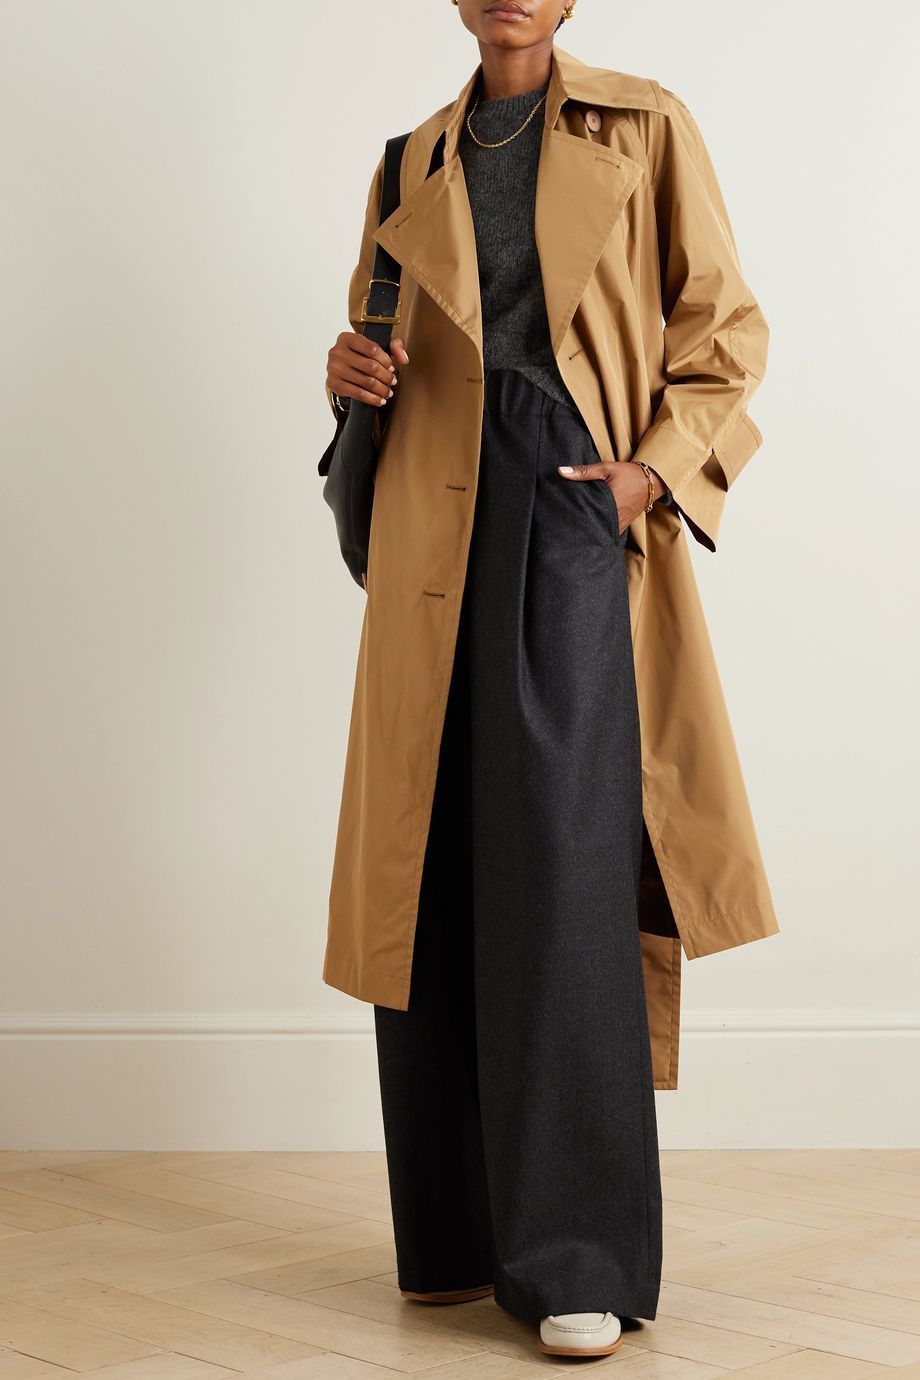 Rainwear Chatsworth belted double-breasted shell trench coat